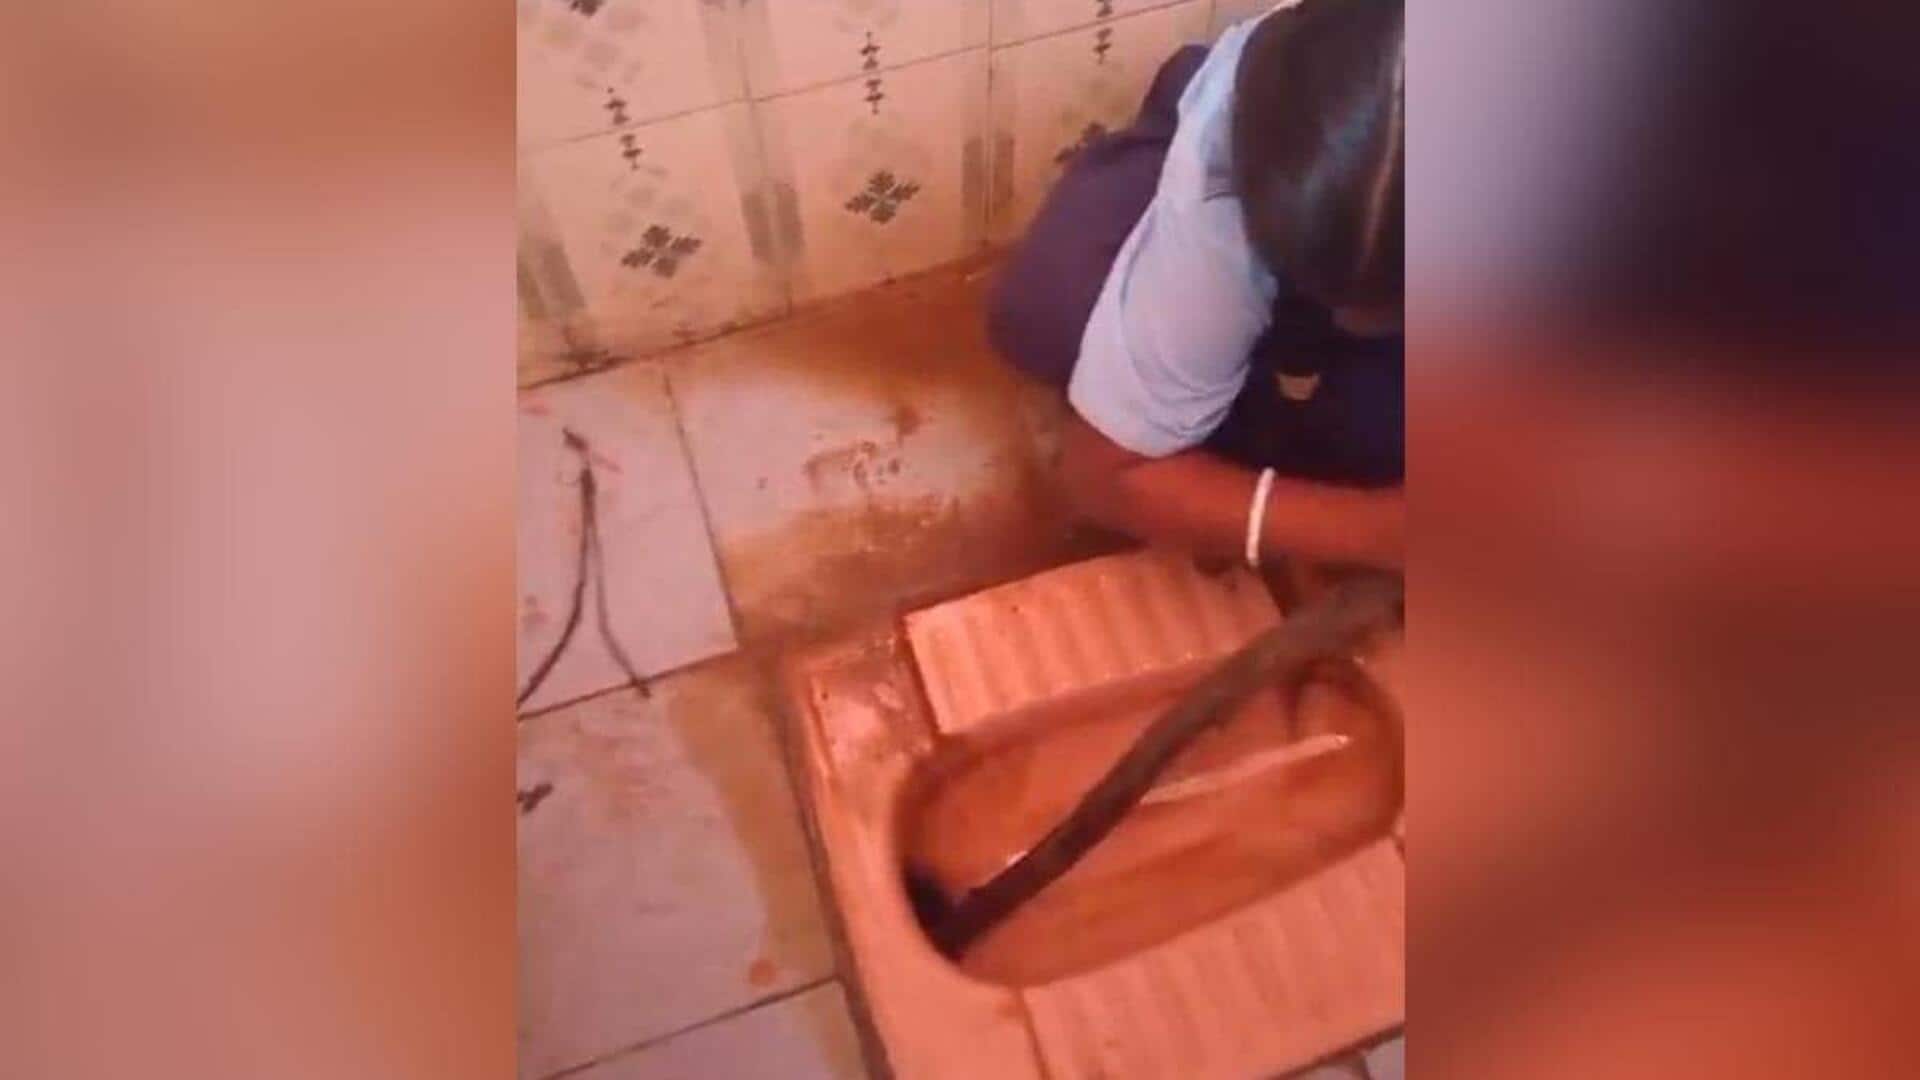 Karnataka: Another video of students cleaning toilet goes viral